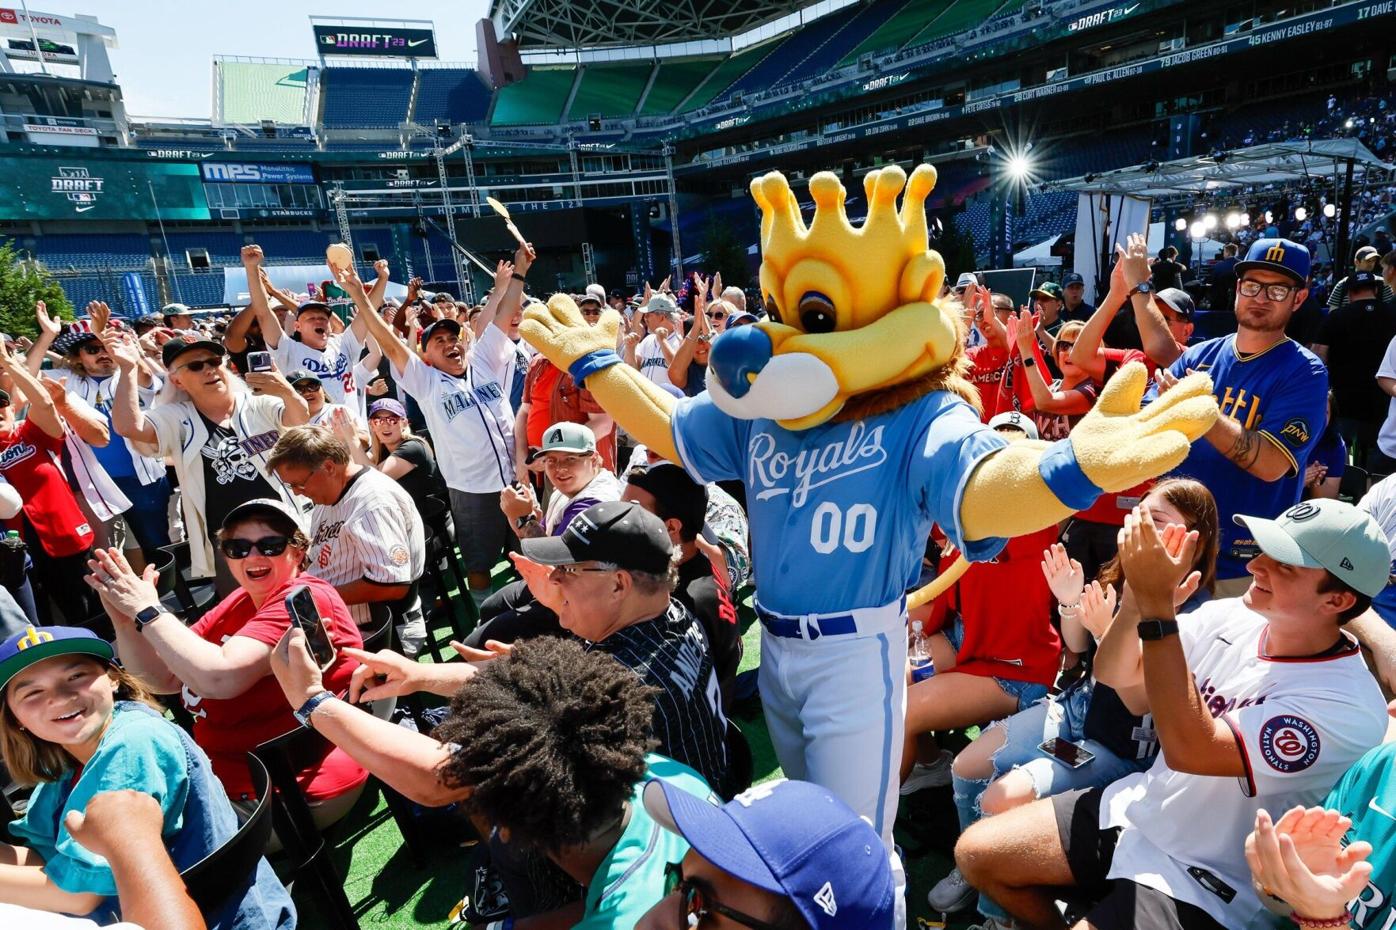 Rays mascot nominated for 'Most Awesome' honor